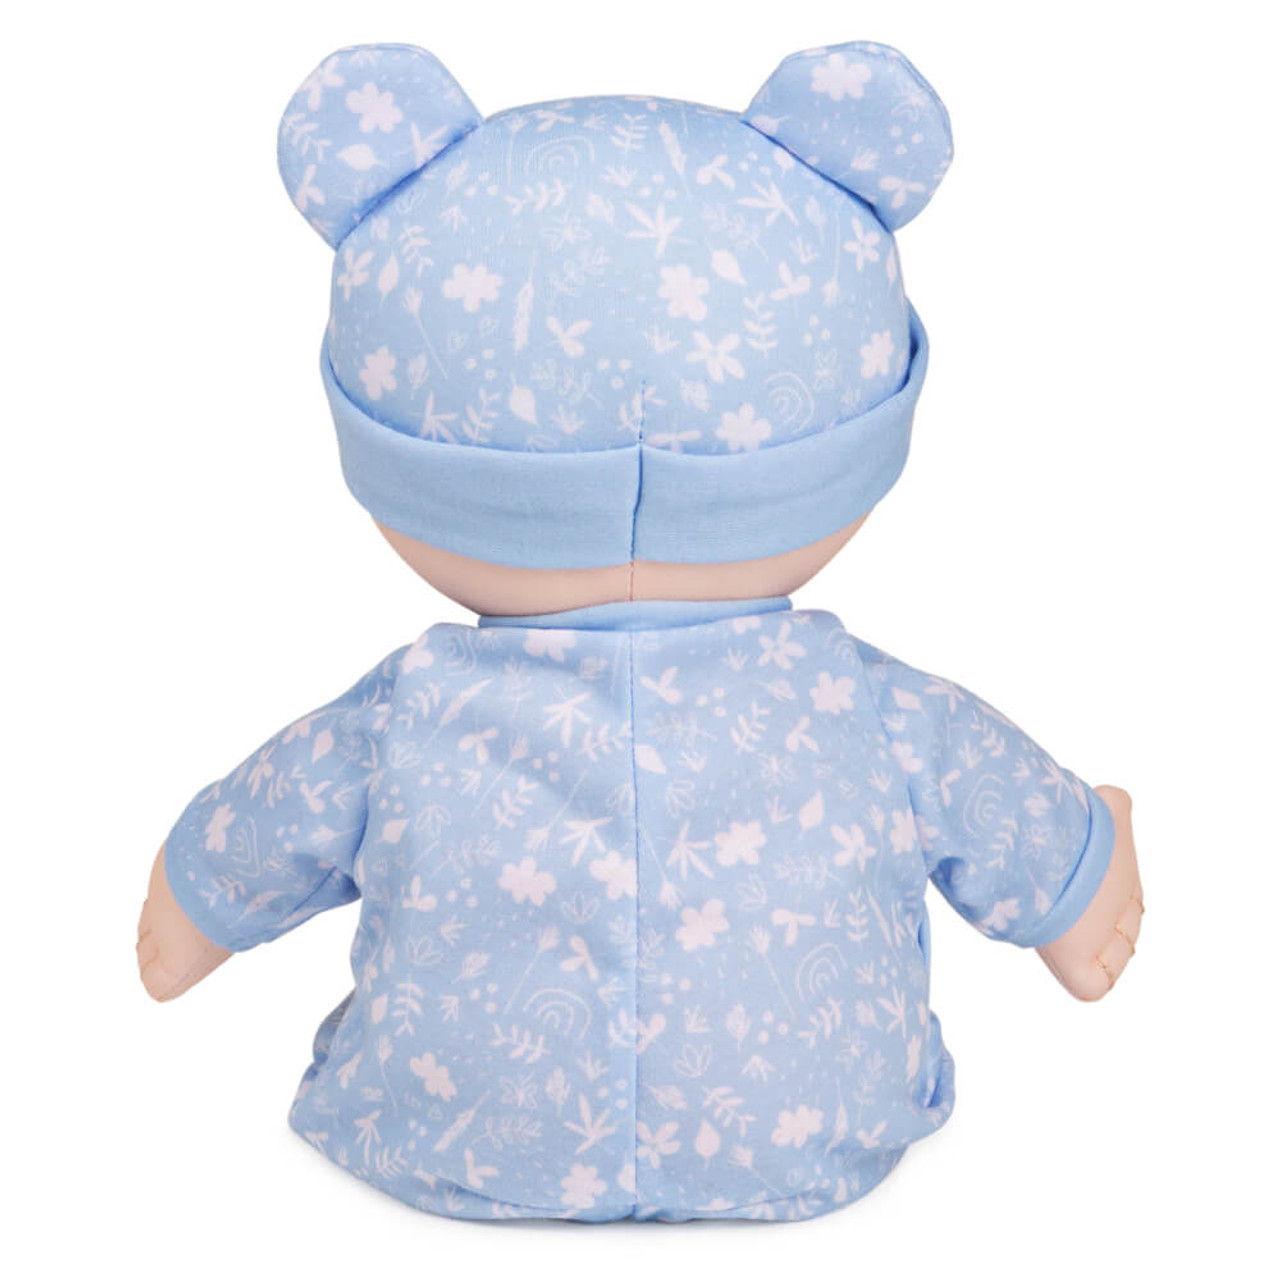 Back View Aster Blue Dolly Gund EAN 249338